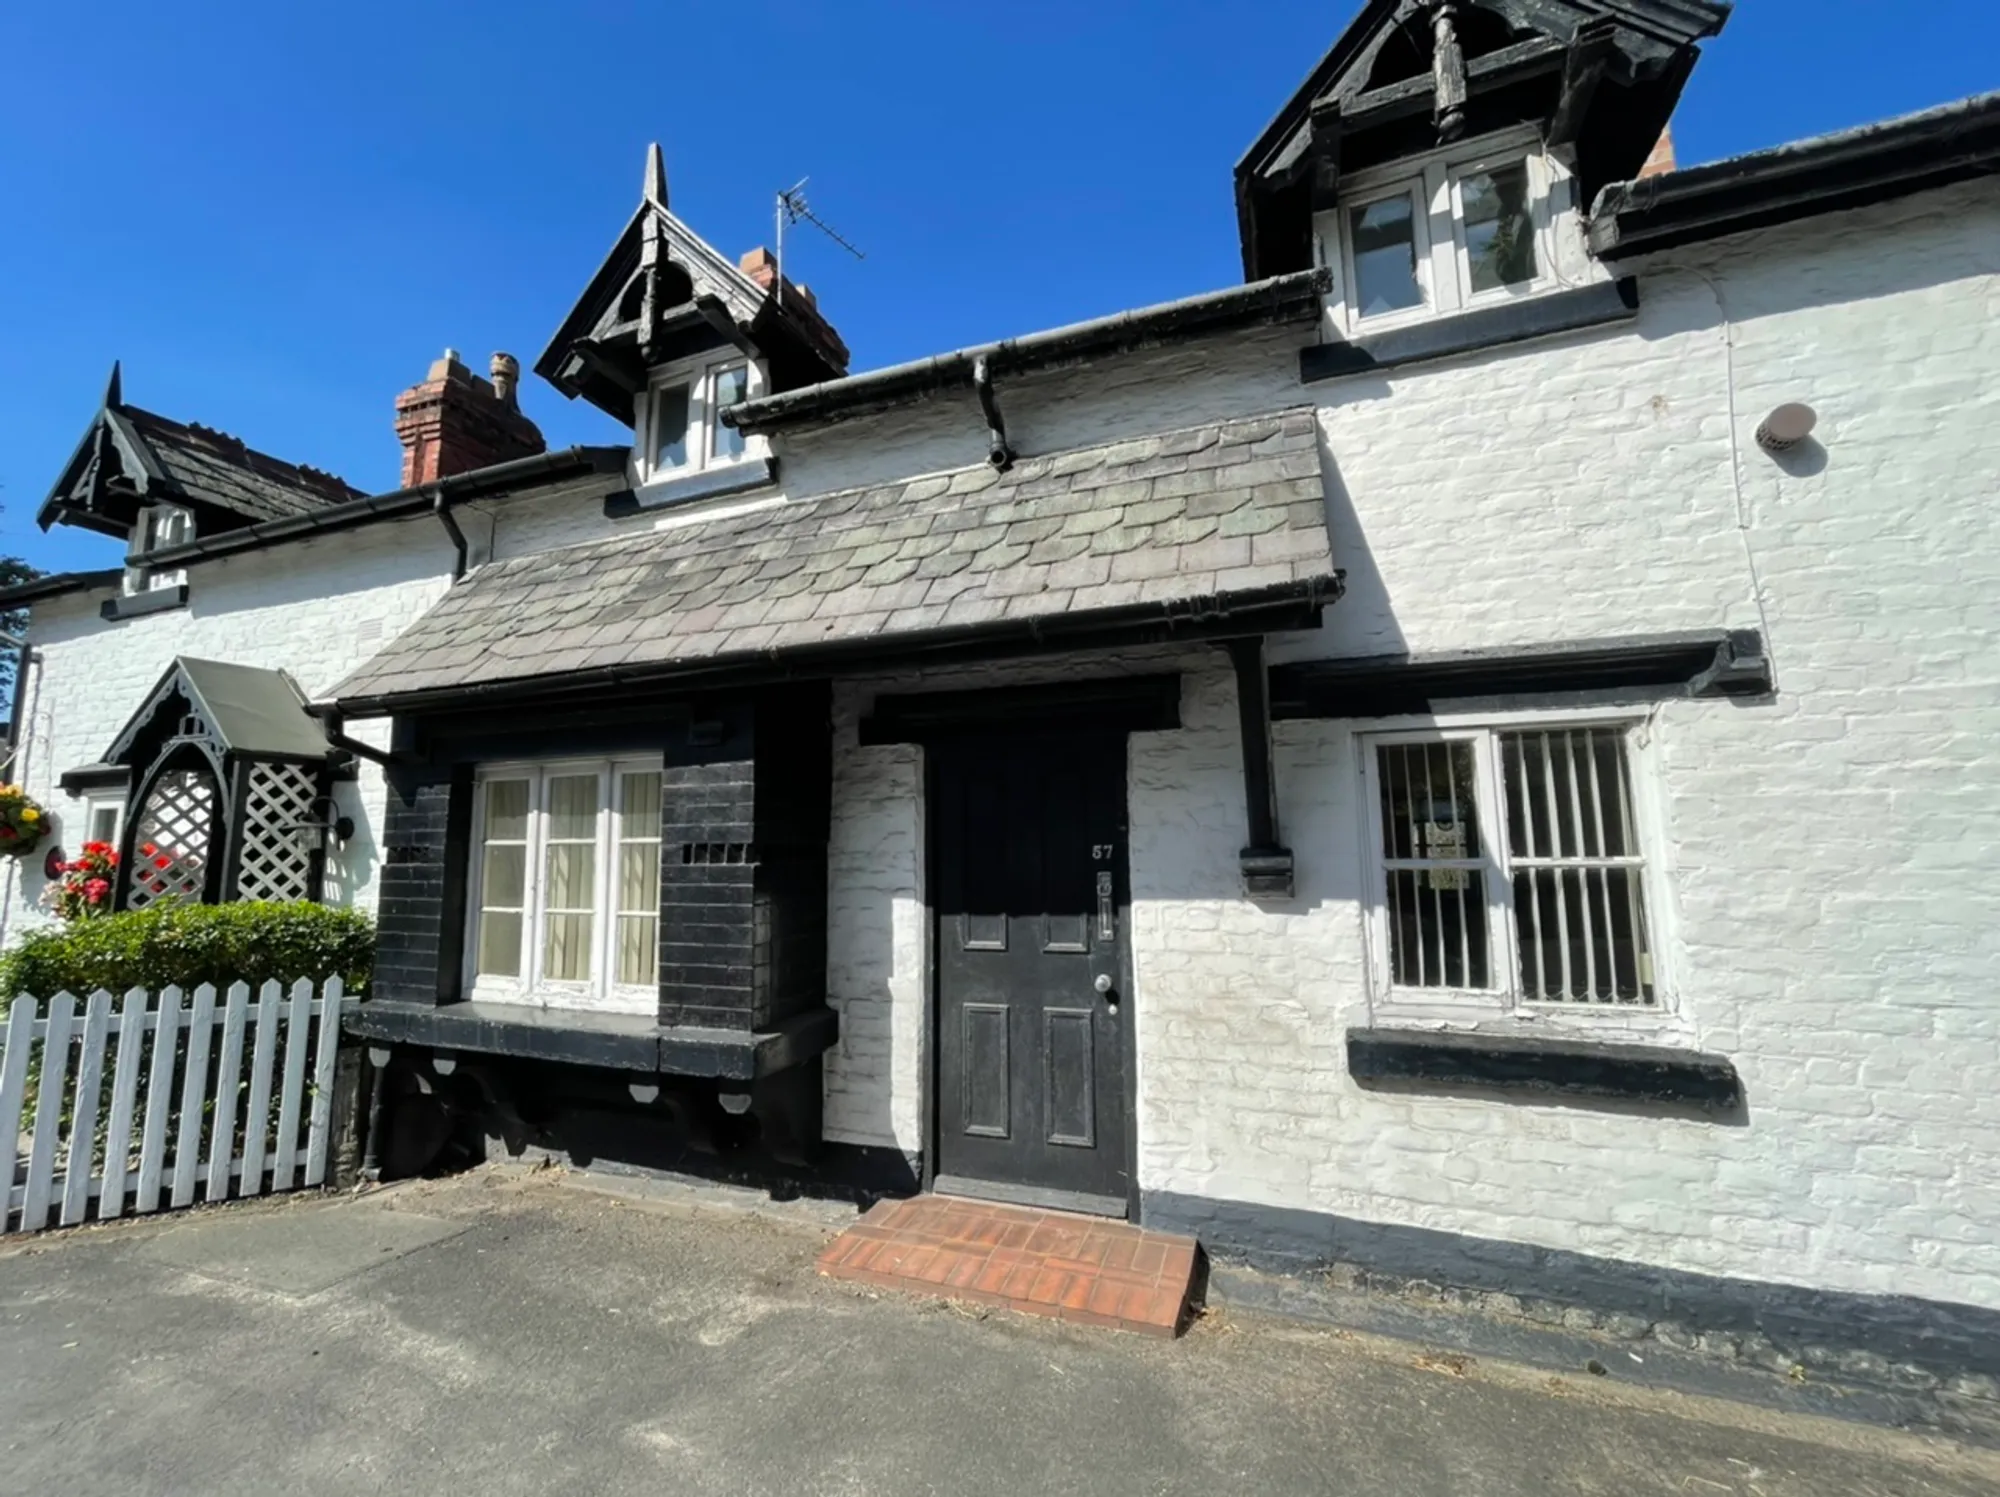 Exciting Grade II Listed cottage in Hale Village, a renovation project with a semi-rural charm near amenities and transport links. Online auction on 24th April. Ideal for developers seeking a prime investment. Contact North Wall for a viewing appointment.